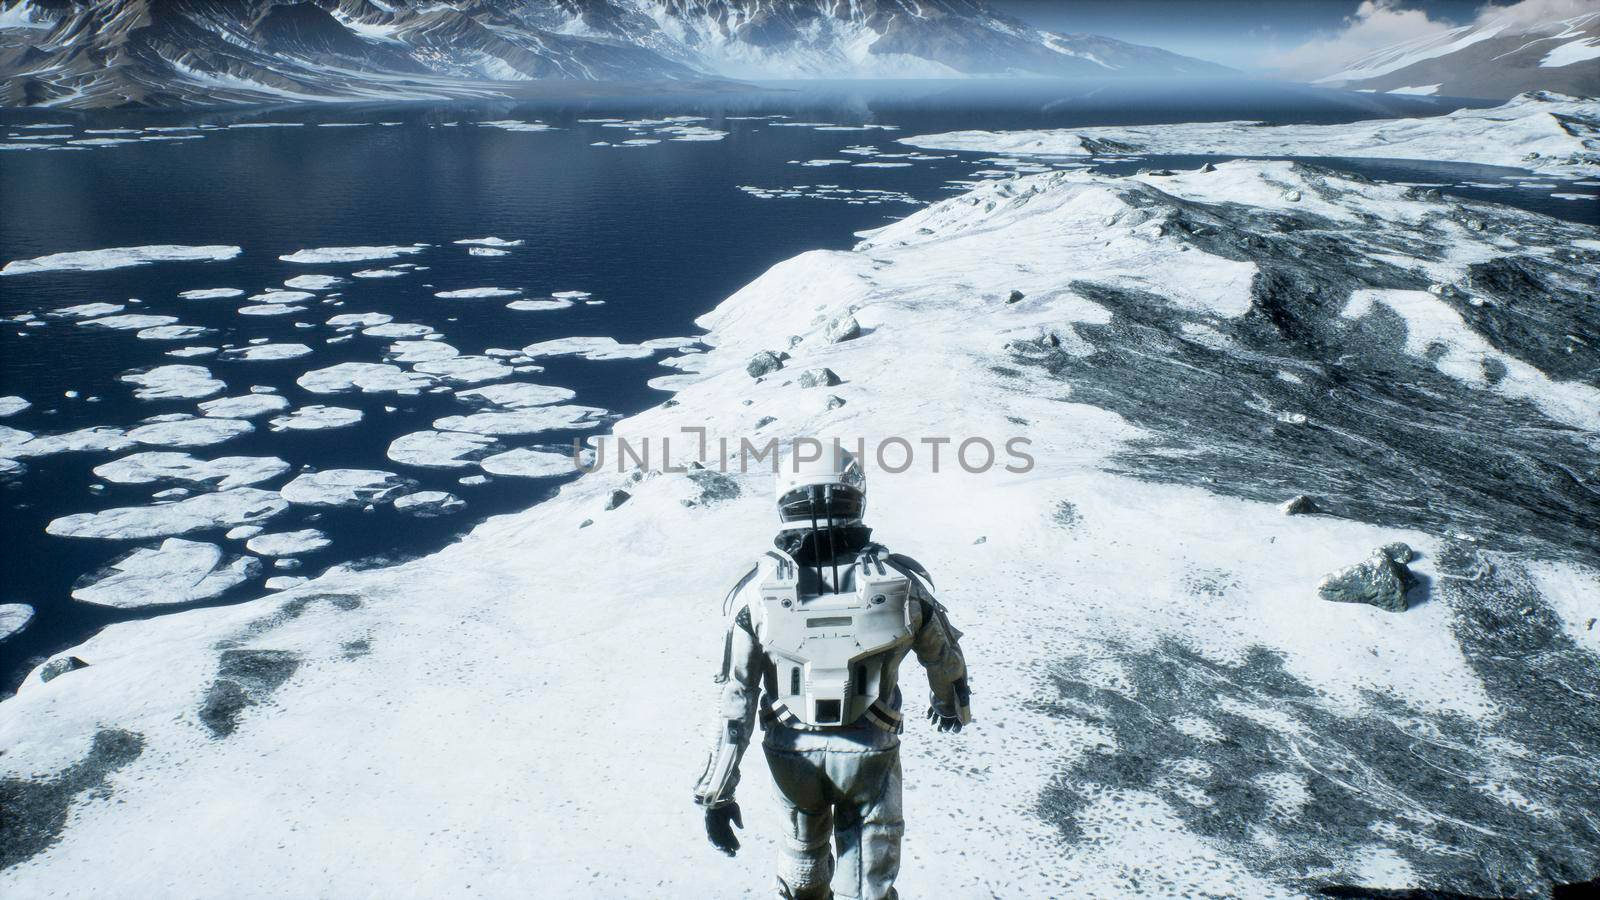 The astronaut is walking on a new unknown snow planet under alien constellations and nebulae. 3D Rendering by designprojects